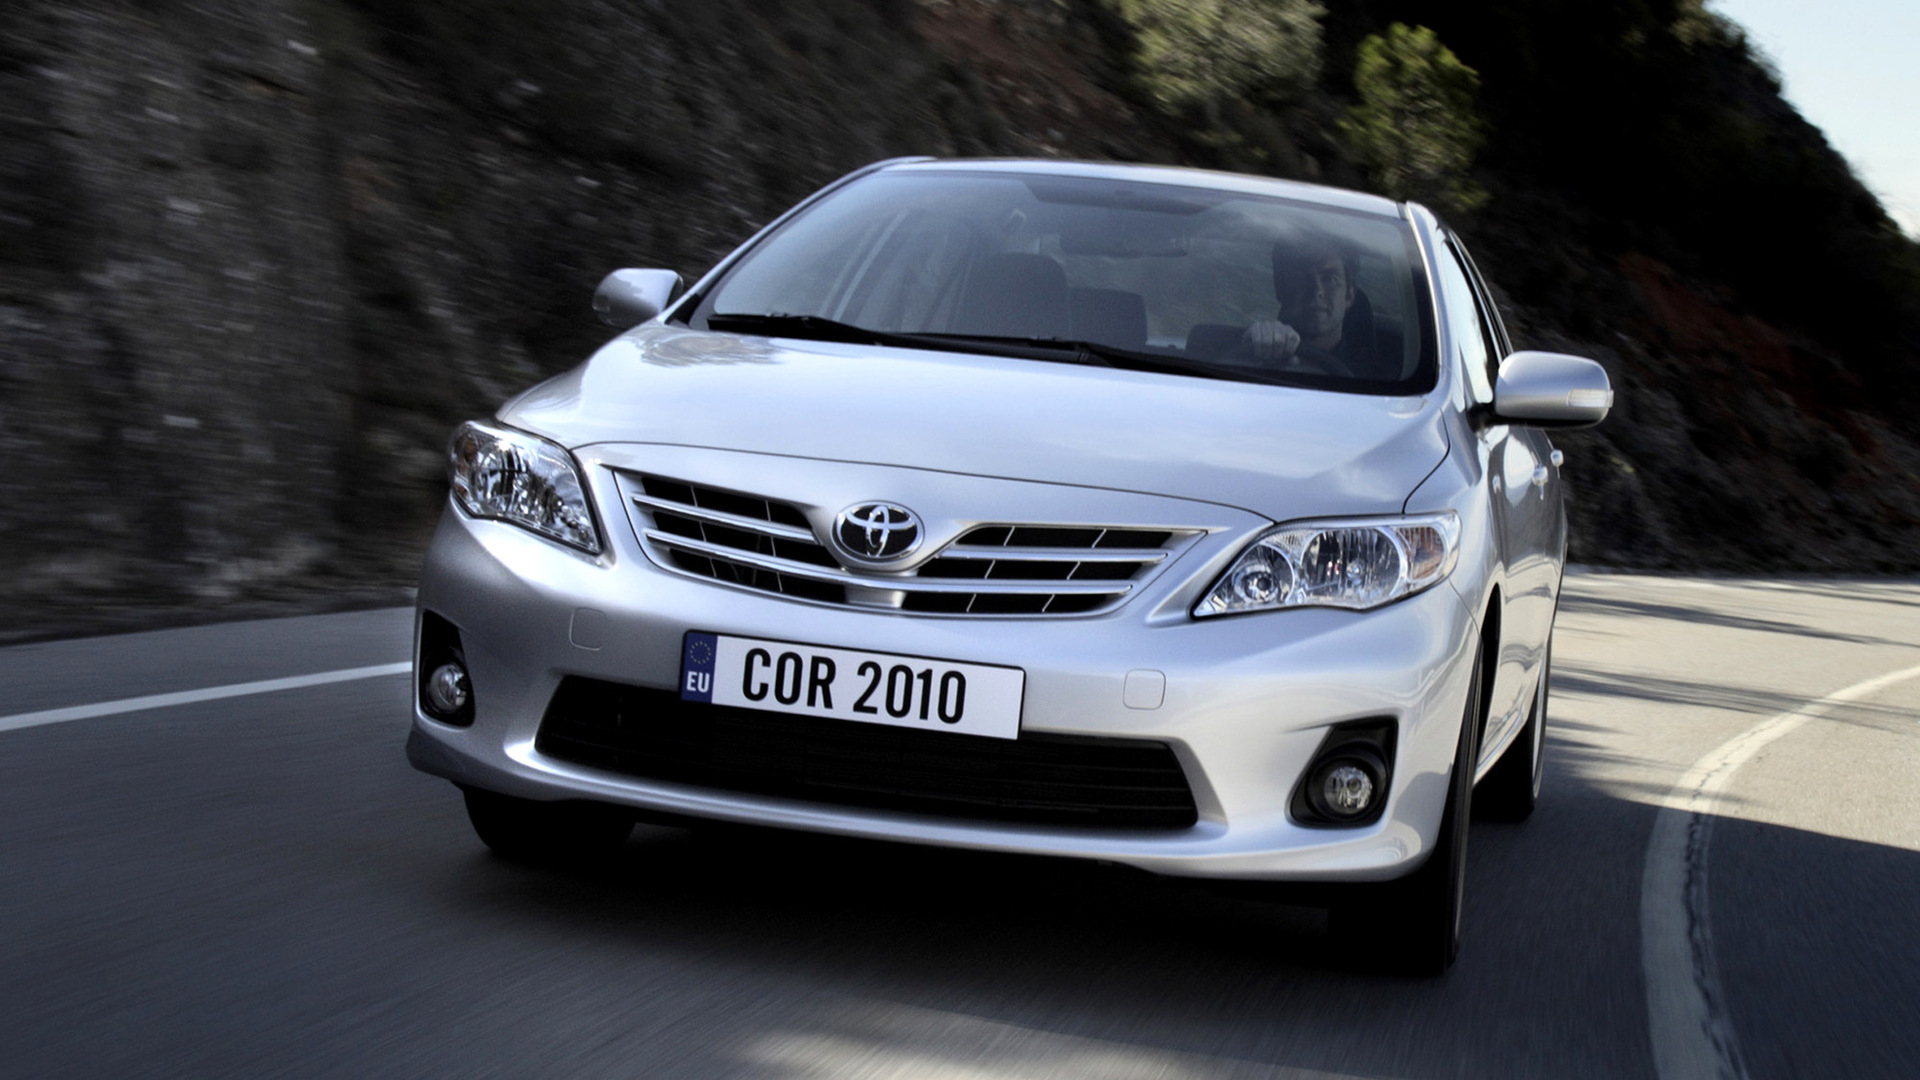 2010 Toyota Corolla (EU) - Wallpapers and HD Images | Car Pixel